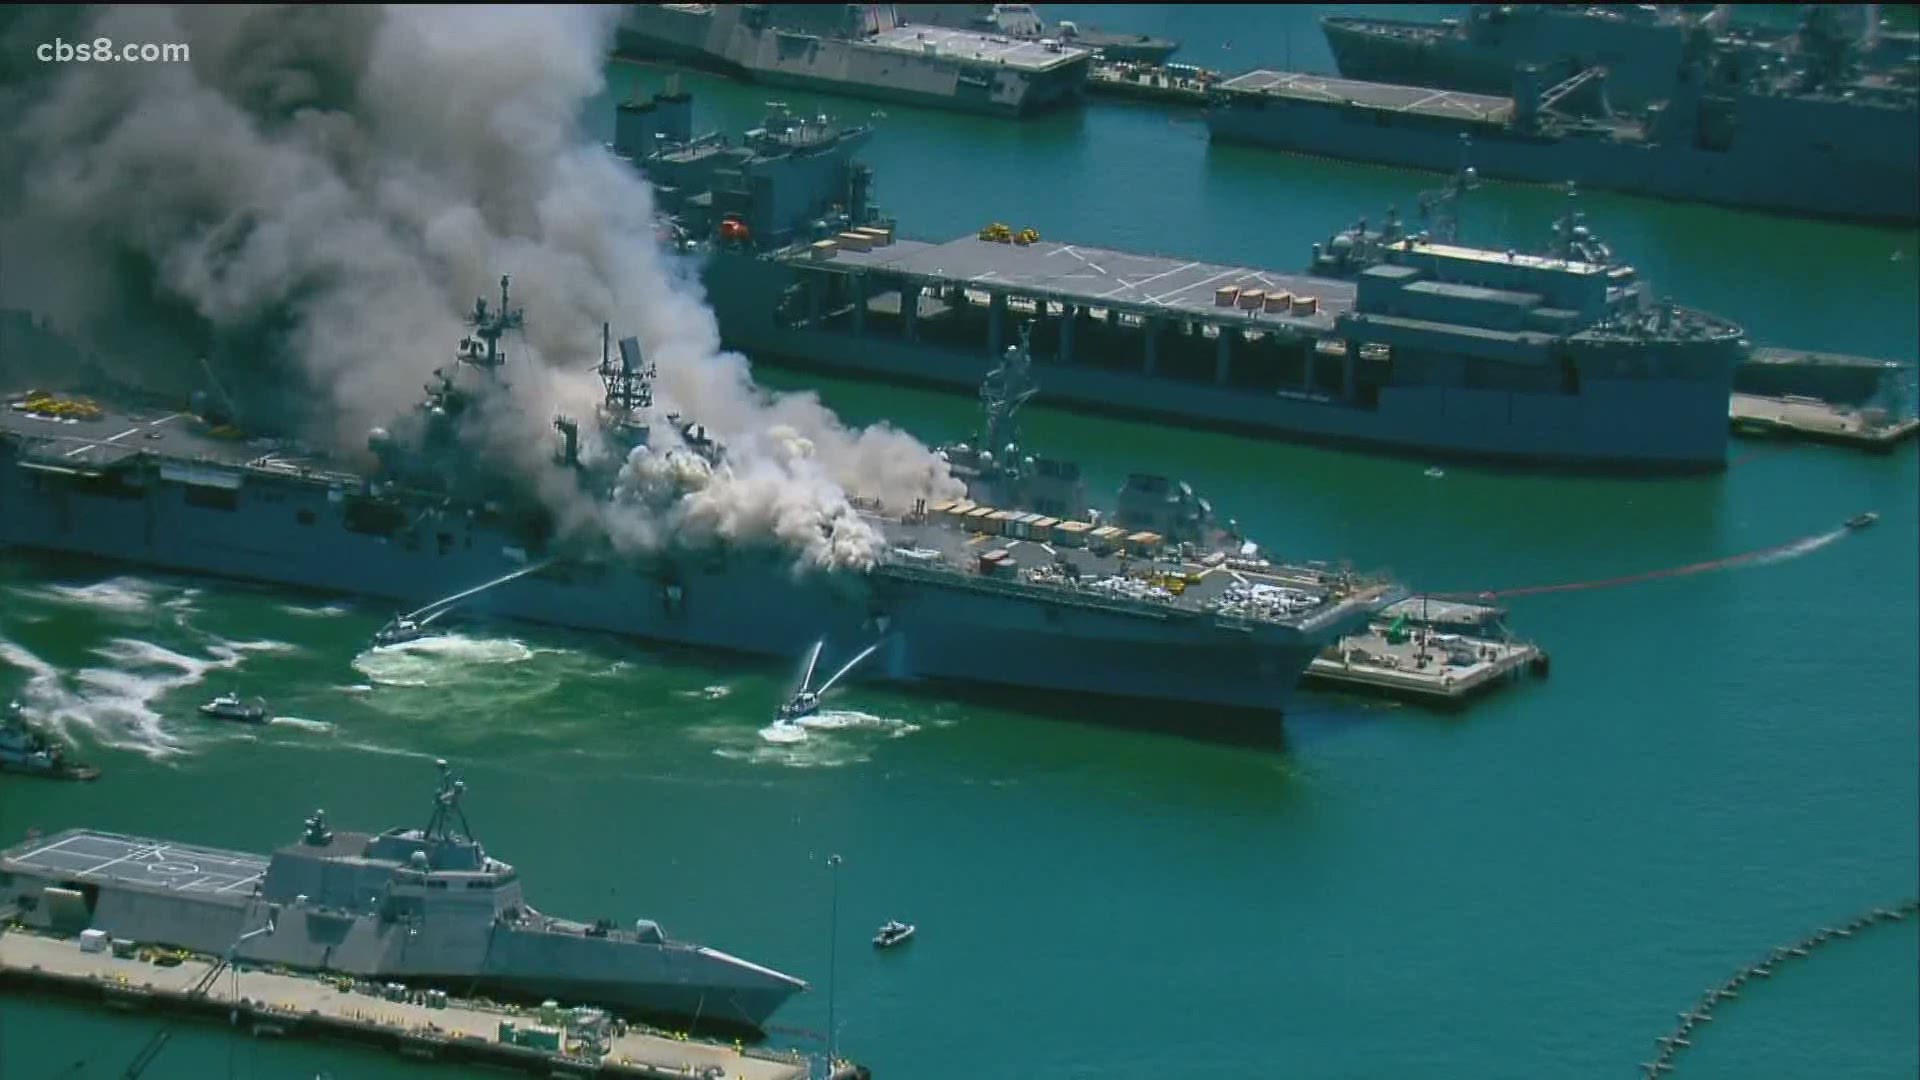 There were 160 sailors and officers aboard the ship when the fire broke out.